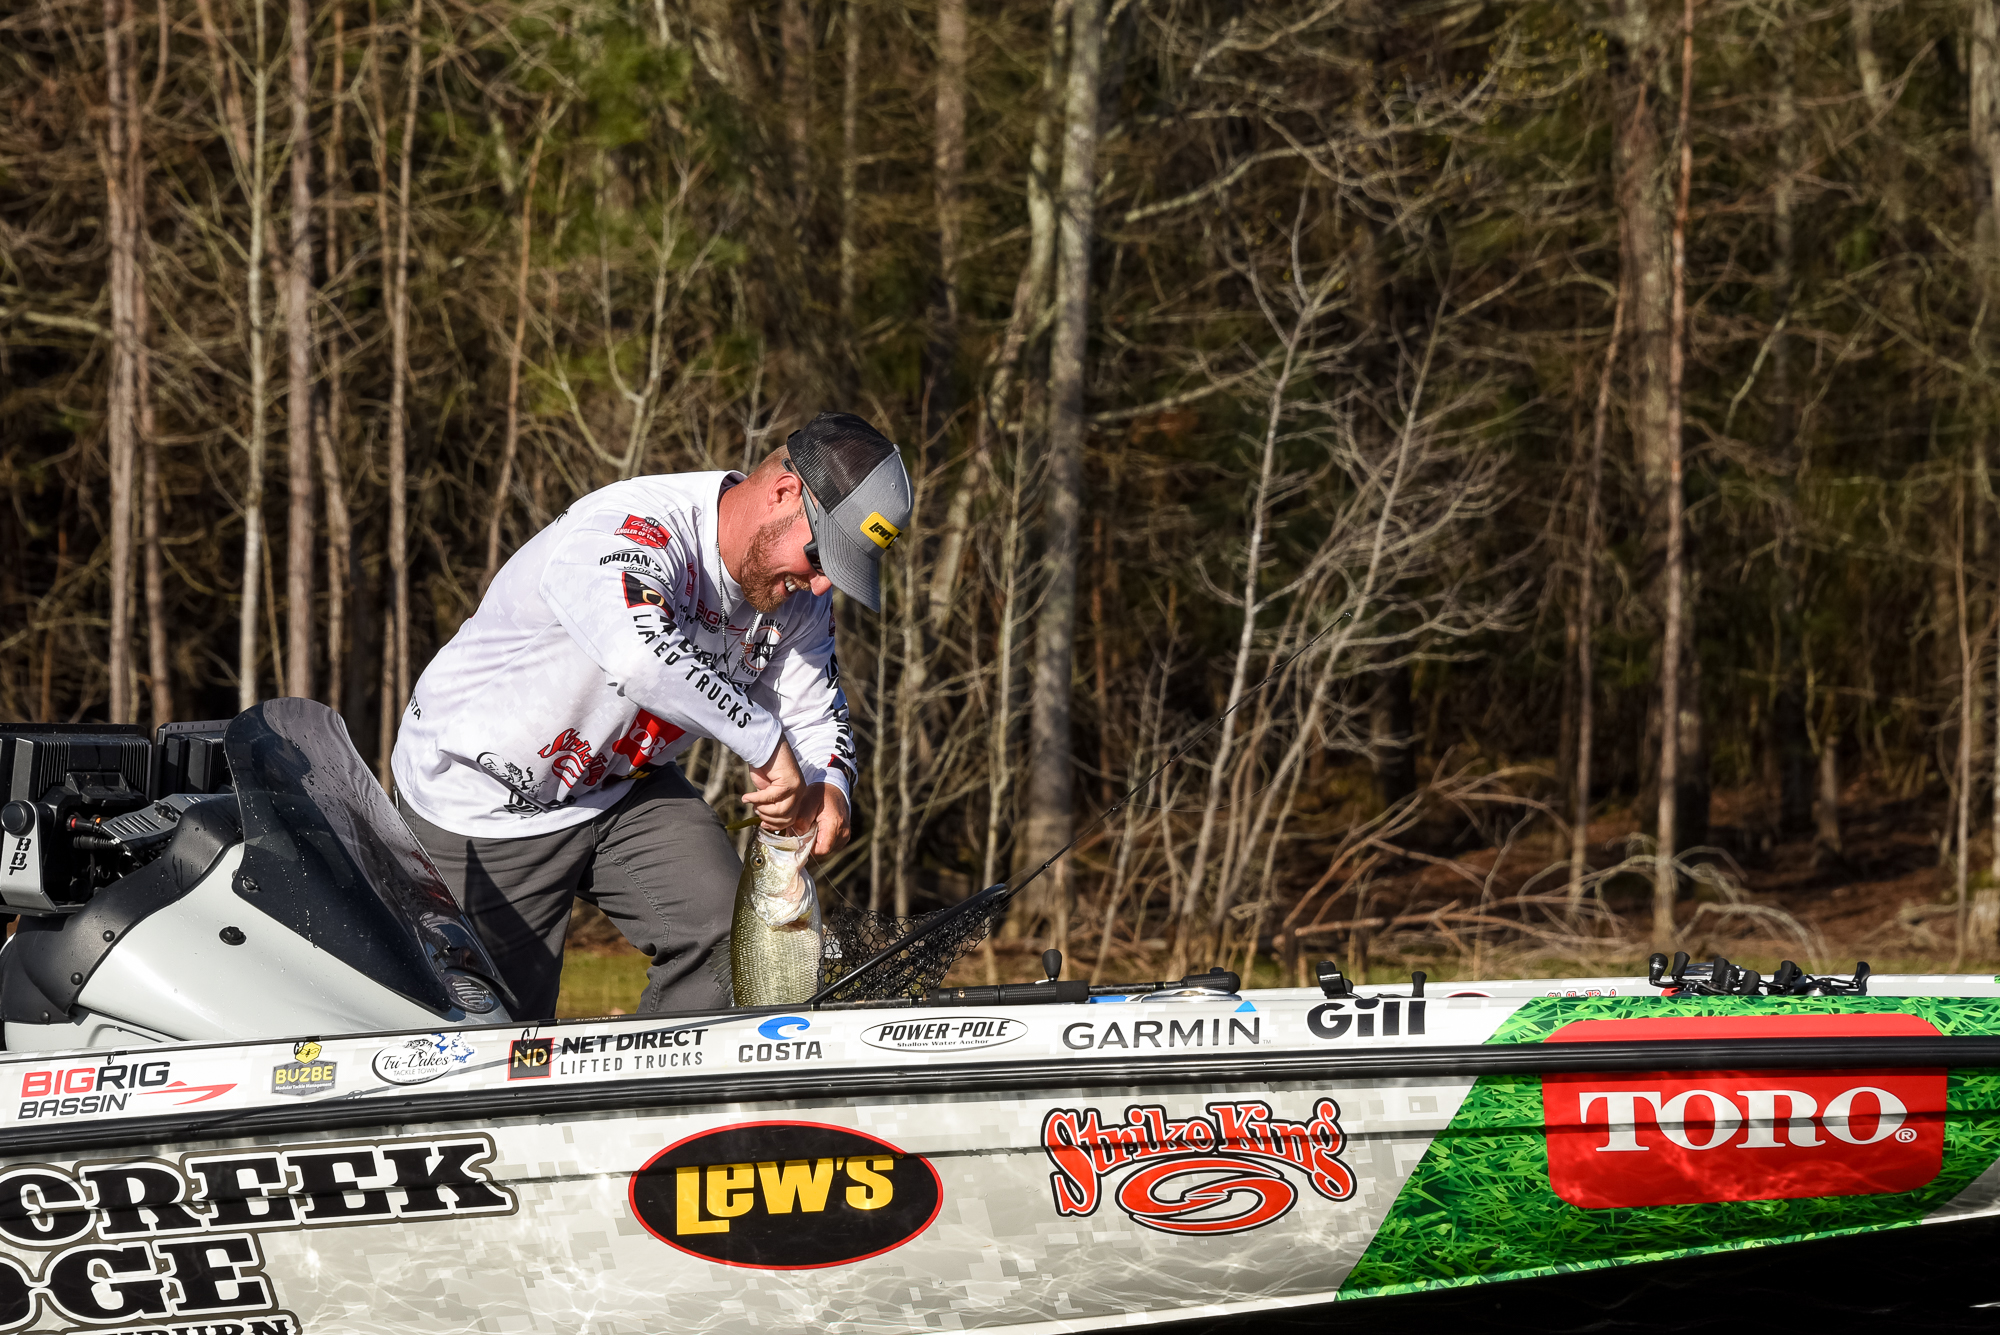 Texan Dakota Ebare smacks 23-pound limit to take early lead at Toyota Stop  2 on Clarks Hill Presented by Lowrance - Major League Fishing